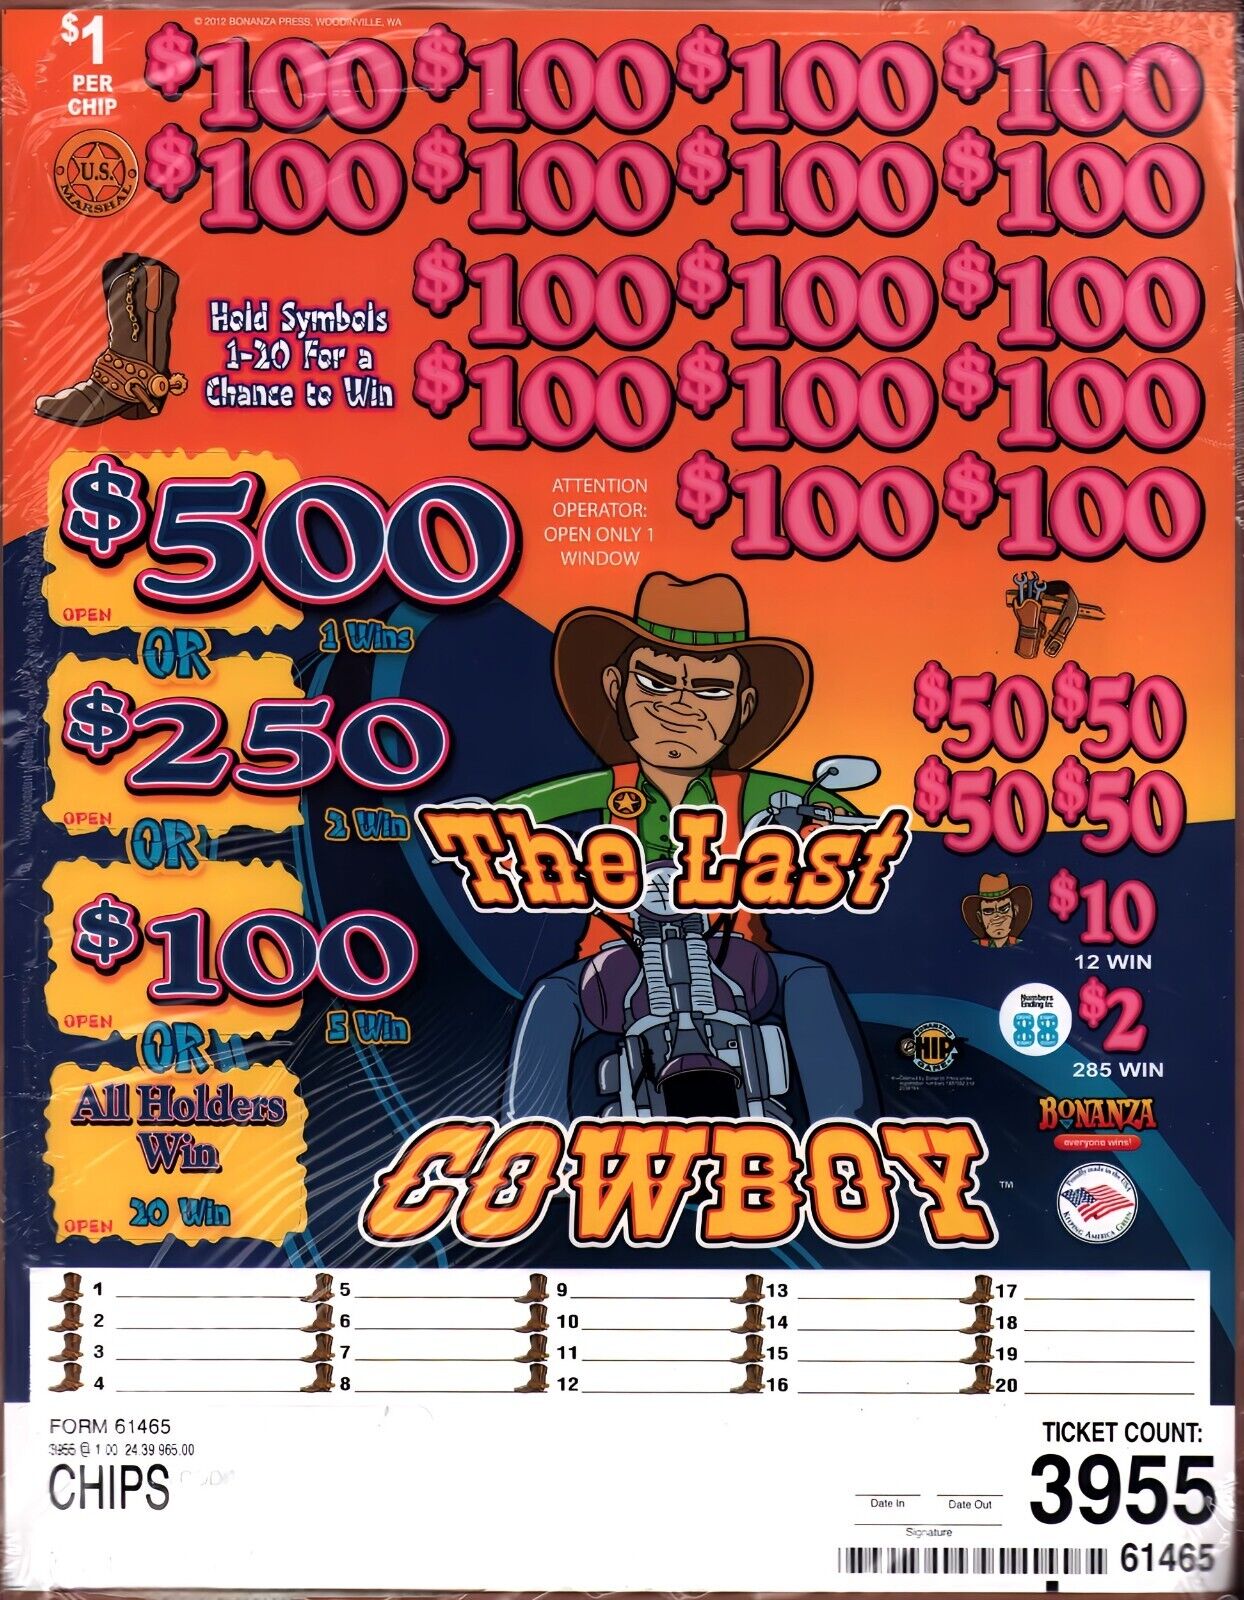 New Pull Tickets - Chip Tickets - The Last Cowboy